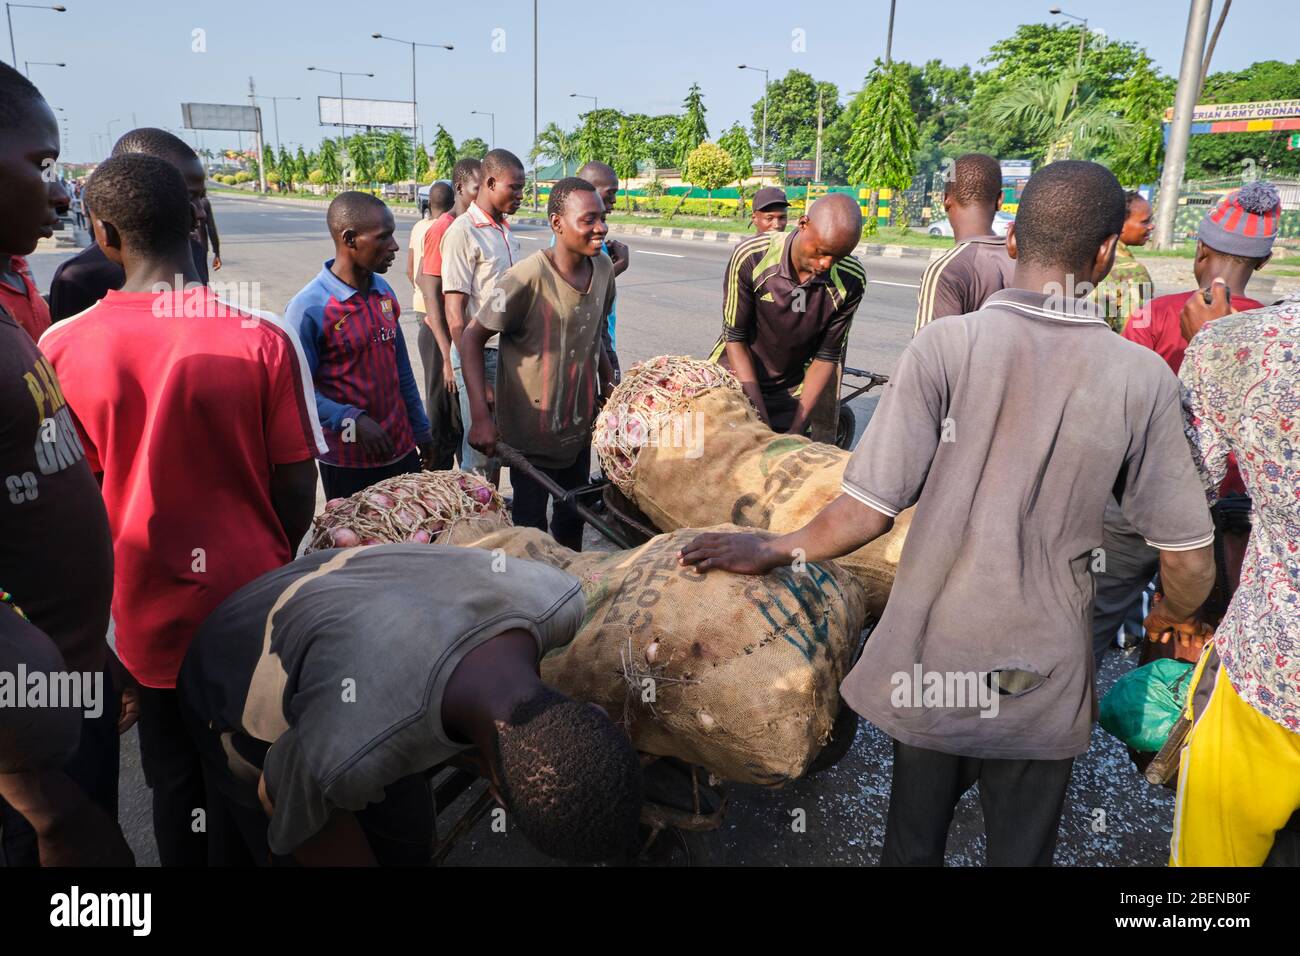 A group of wheelbarrow pushers load bags of onions into their wheelbarrow at a bus stop in Lagos, Nigeria. Stock Photo